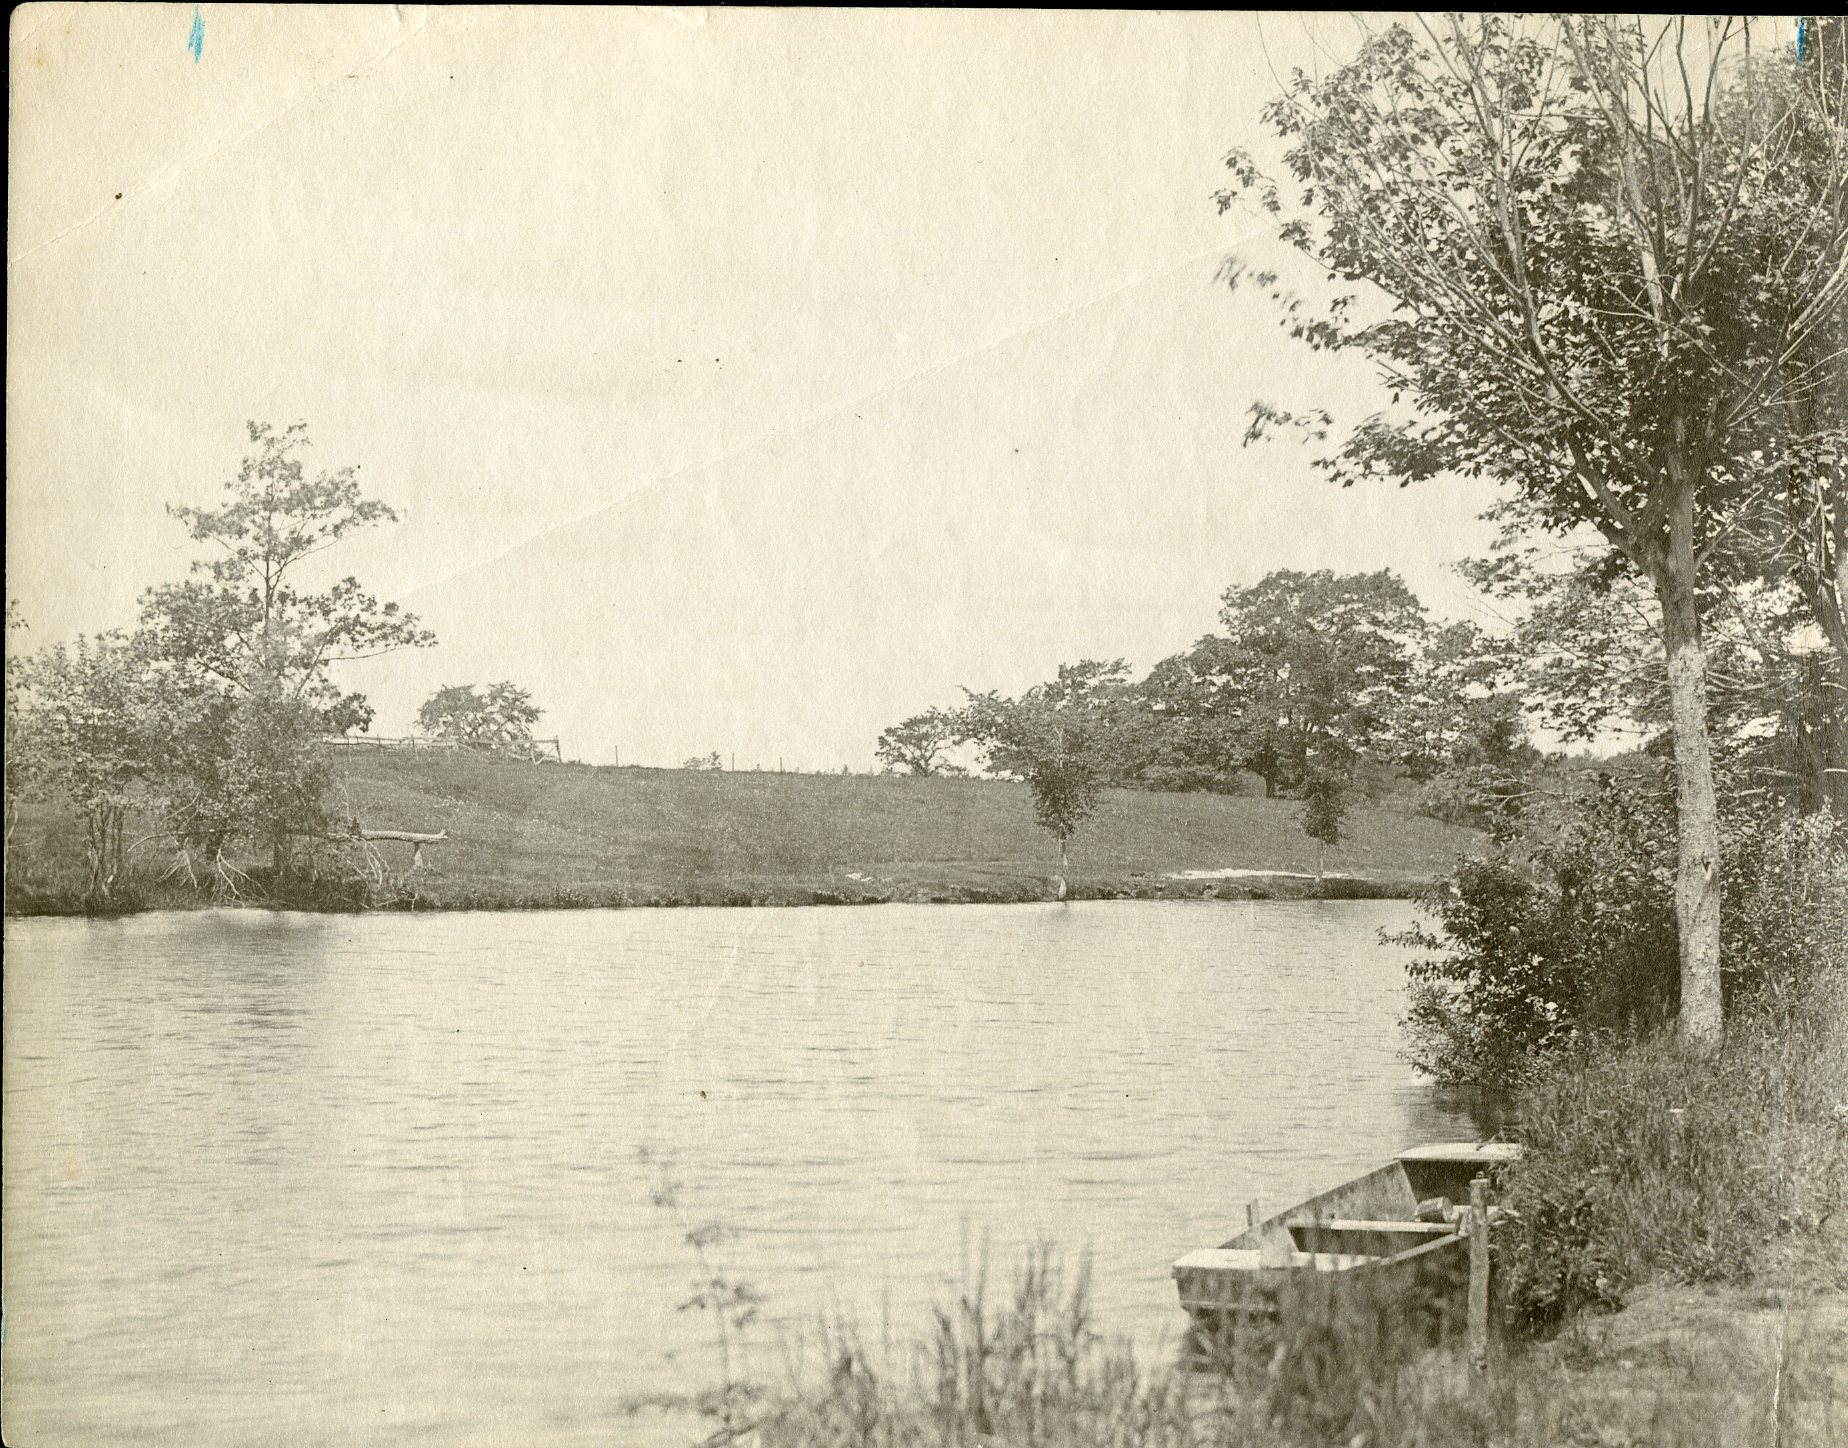 Photo of the site of the Sayward Mill on the Mousam River at Sayward Street, Kennebunk. Date unknown